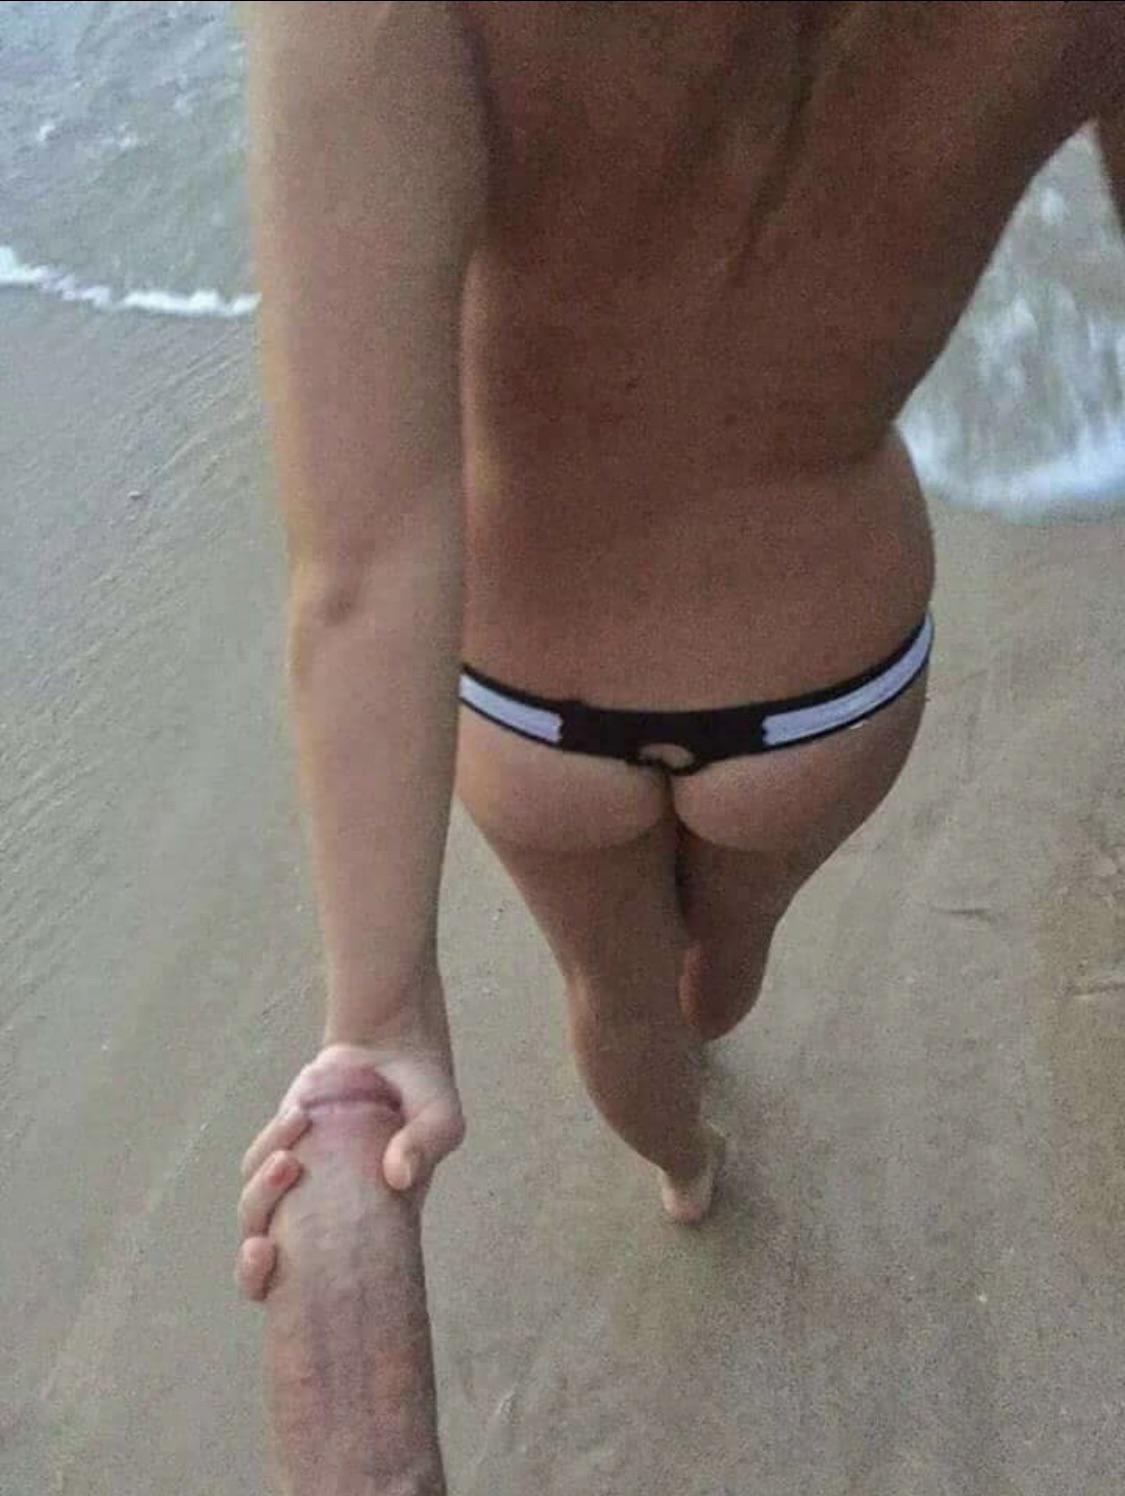 39M Send your wife to me in Florida so I can take her to the beach. We will send pics and videos ?